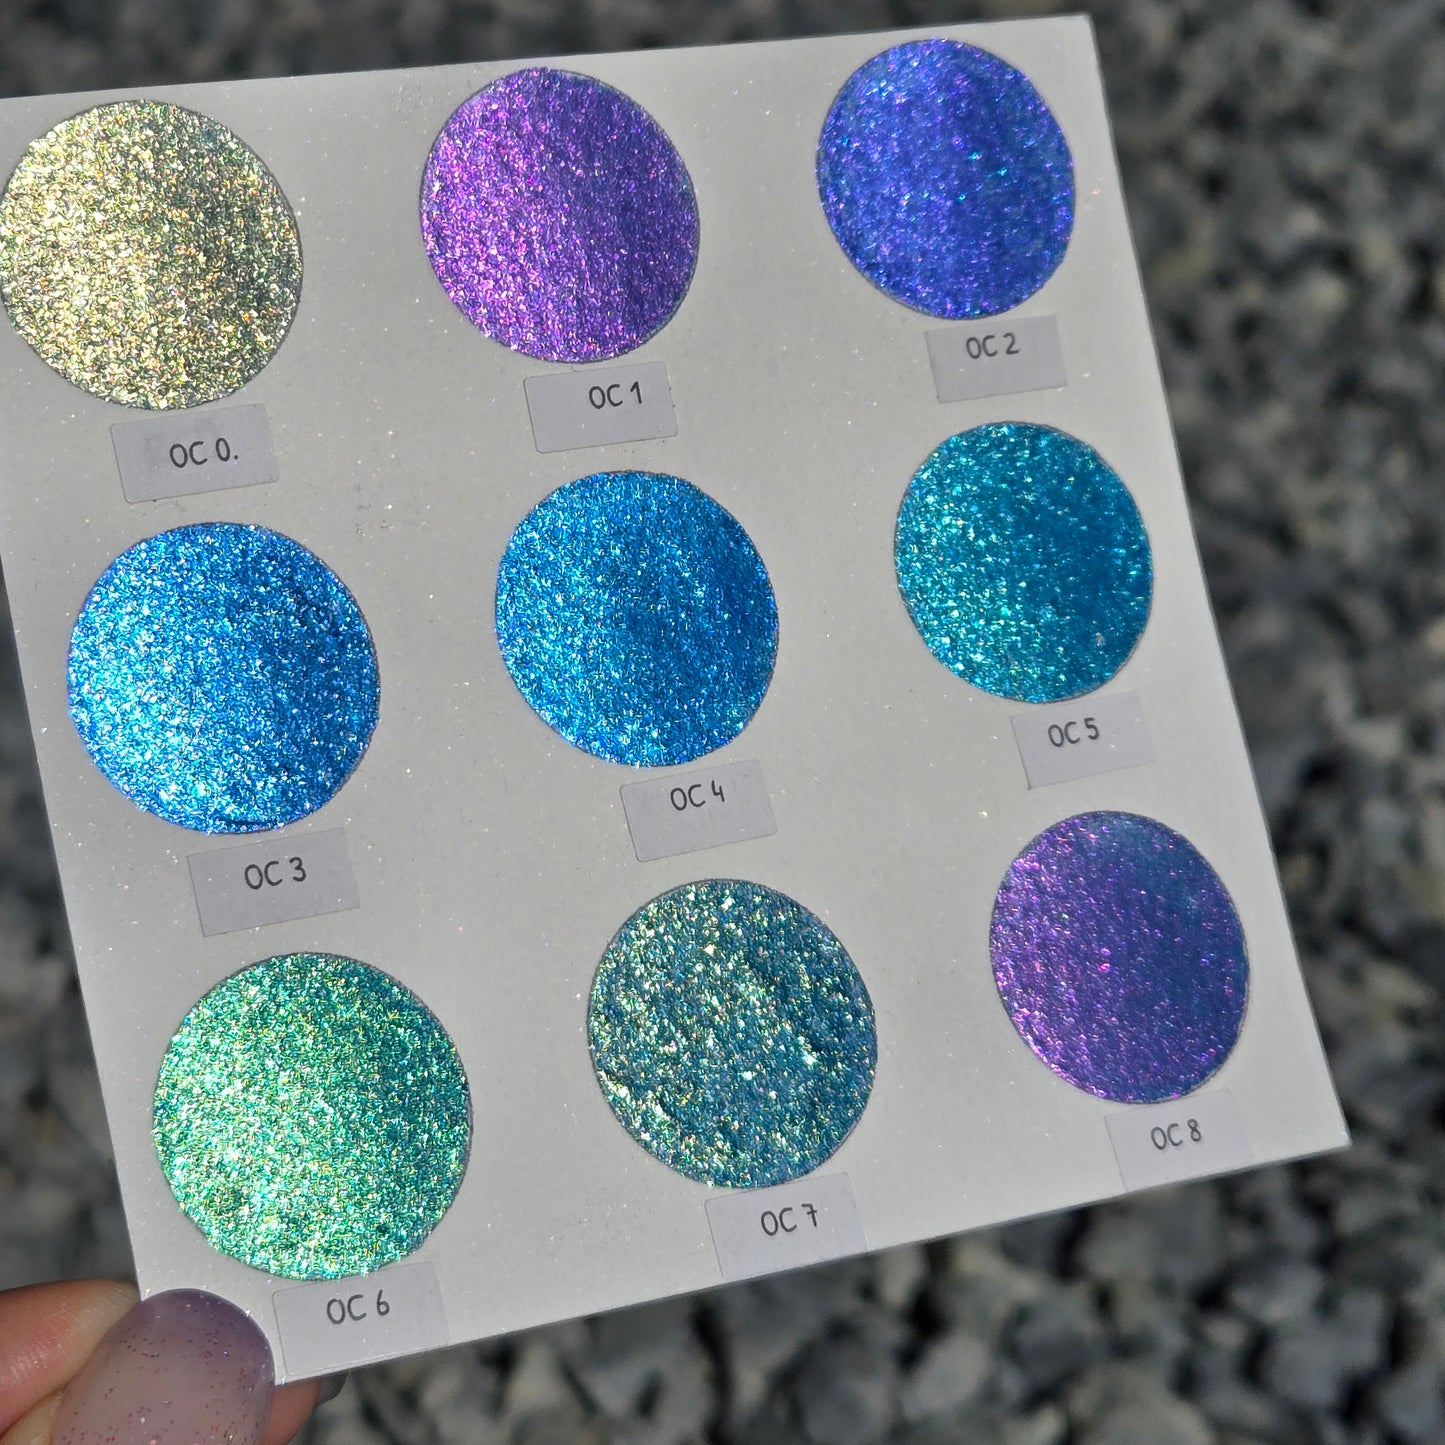 Oceans8 Half Pan Handmade Color Shift Aurora Shimmer Metallic Chameleon Watercolor Paints by iuilewatercolors